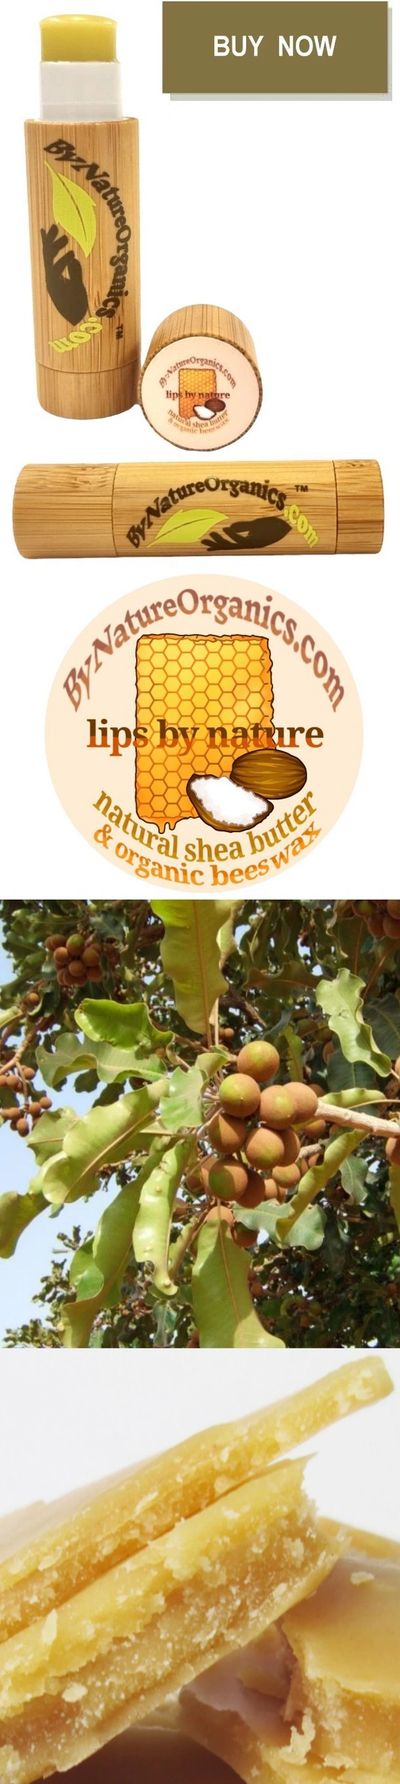 https://sugarswitch.com/shop/ols/products/shea-butter--beeswax-luxury-lip-balm